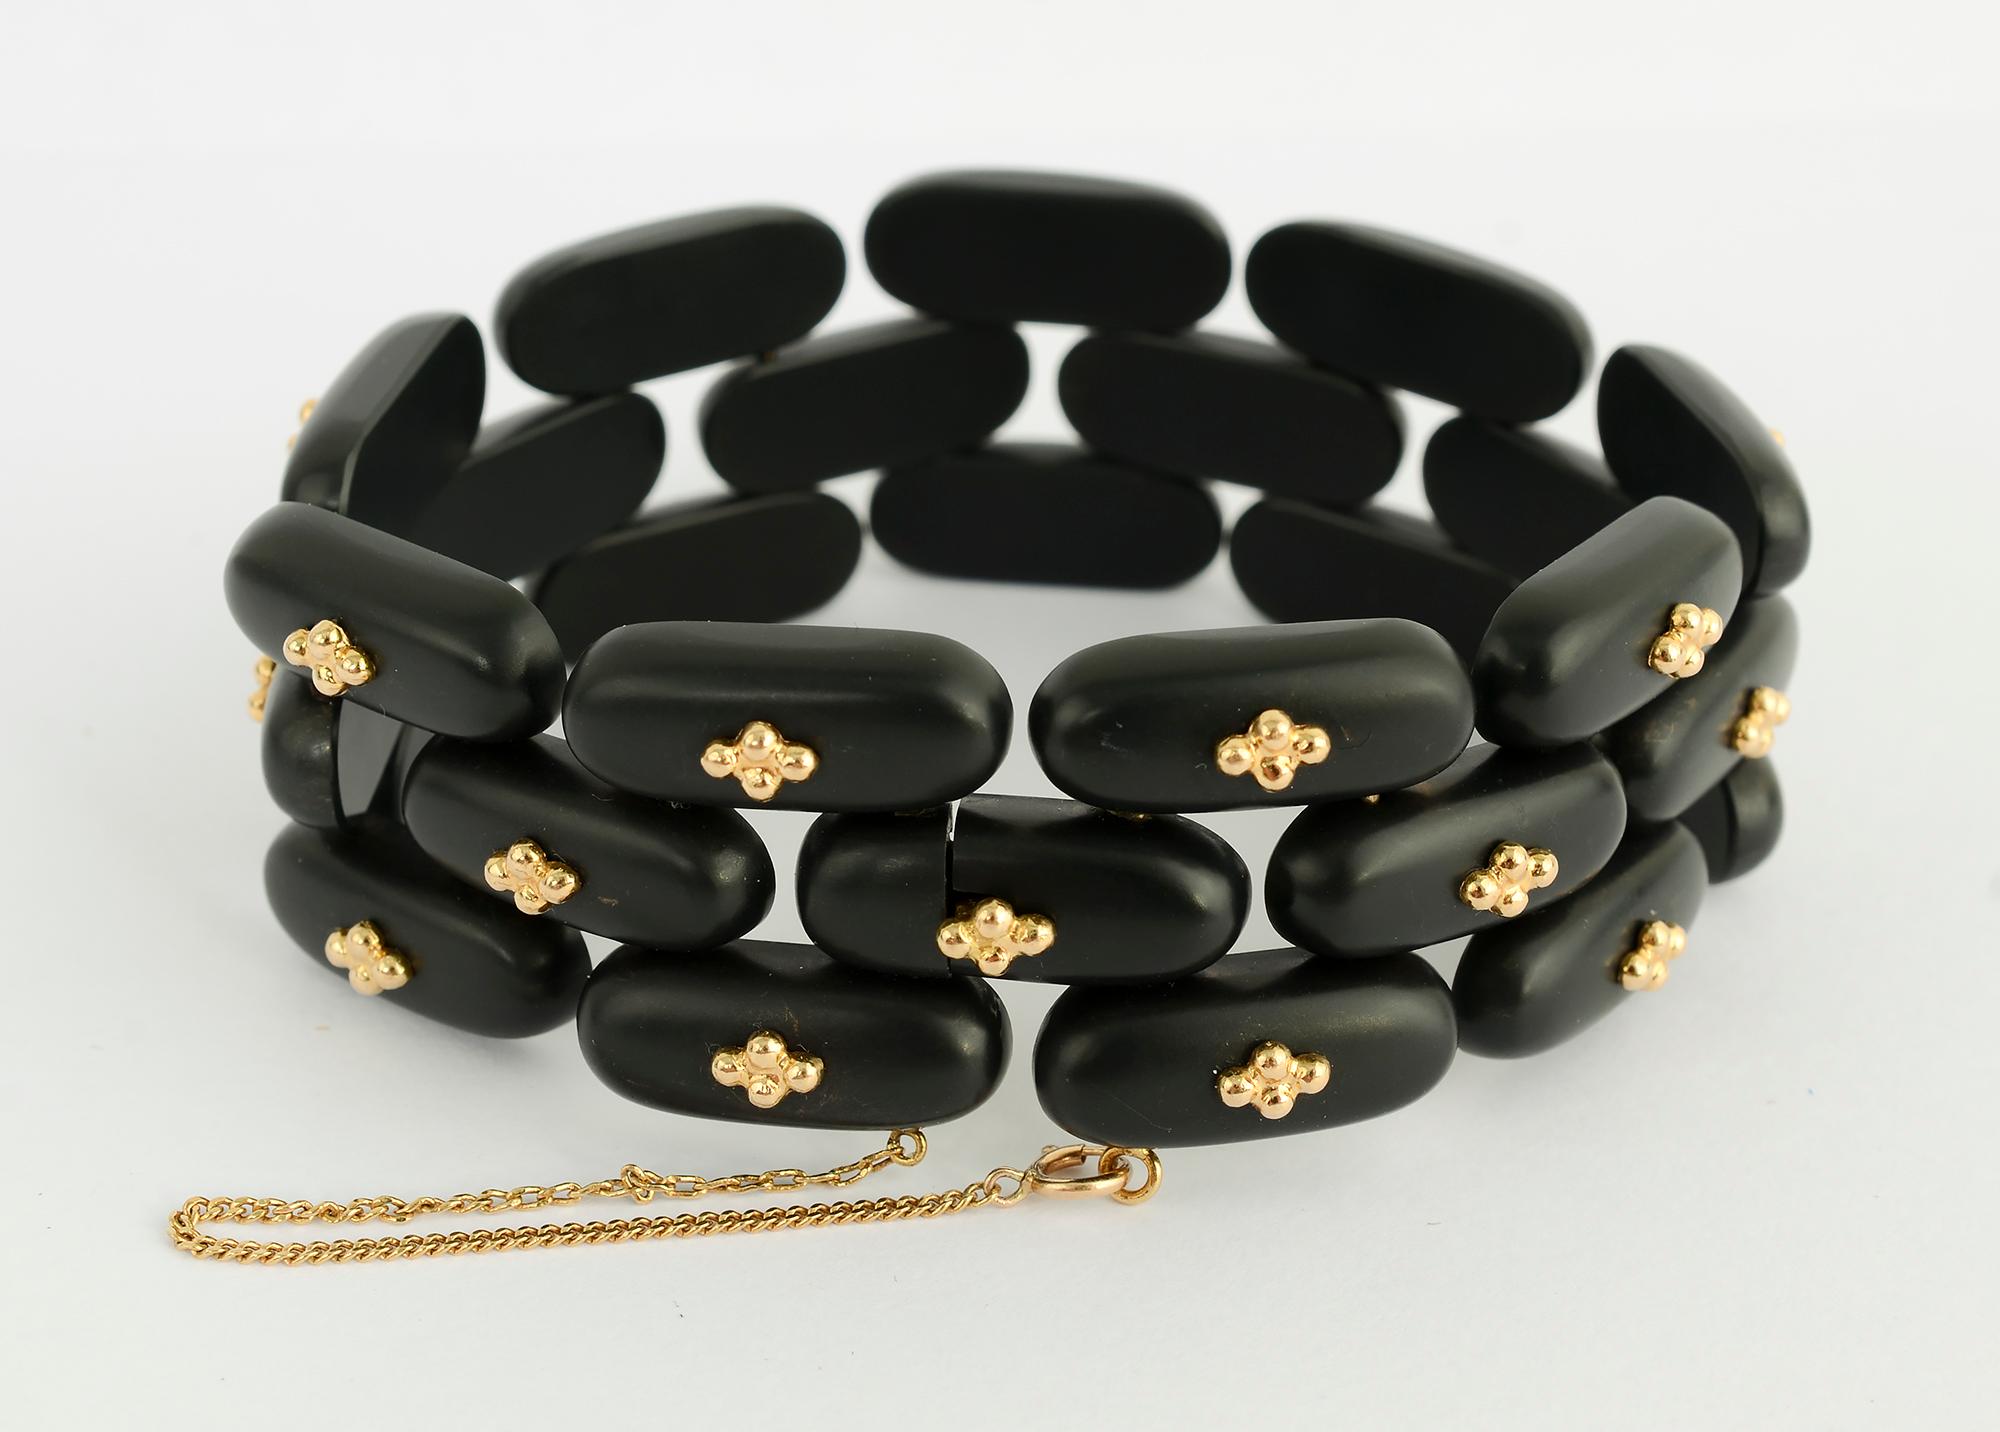 Stunning black jade and gold bracelet and earrings by Angela Cummings. Each link of the bracelet has four gold balls in the center. On each of the earrings, seven groups of the same balls are set on an angle.
The bracelet is 15/16